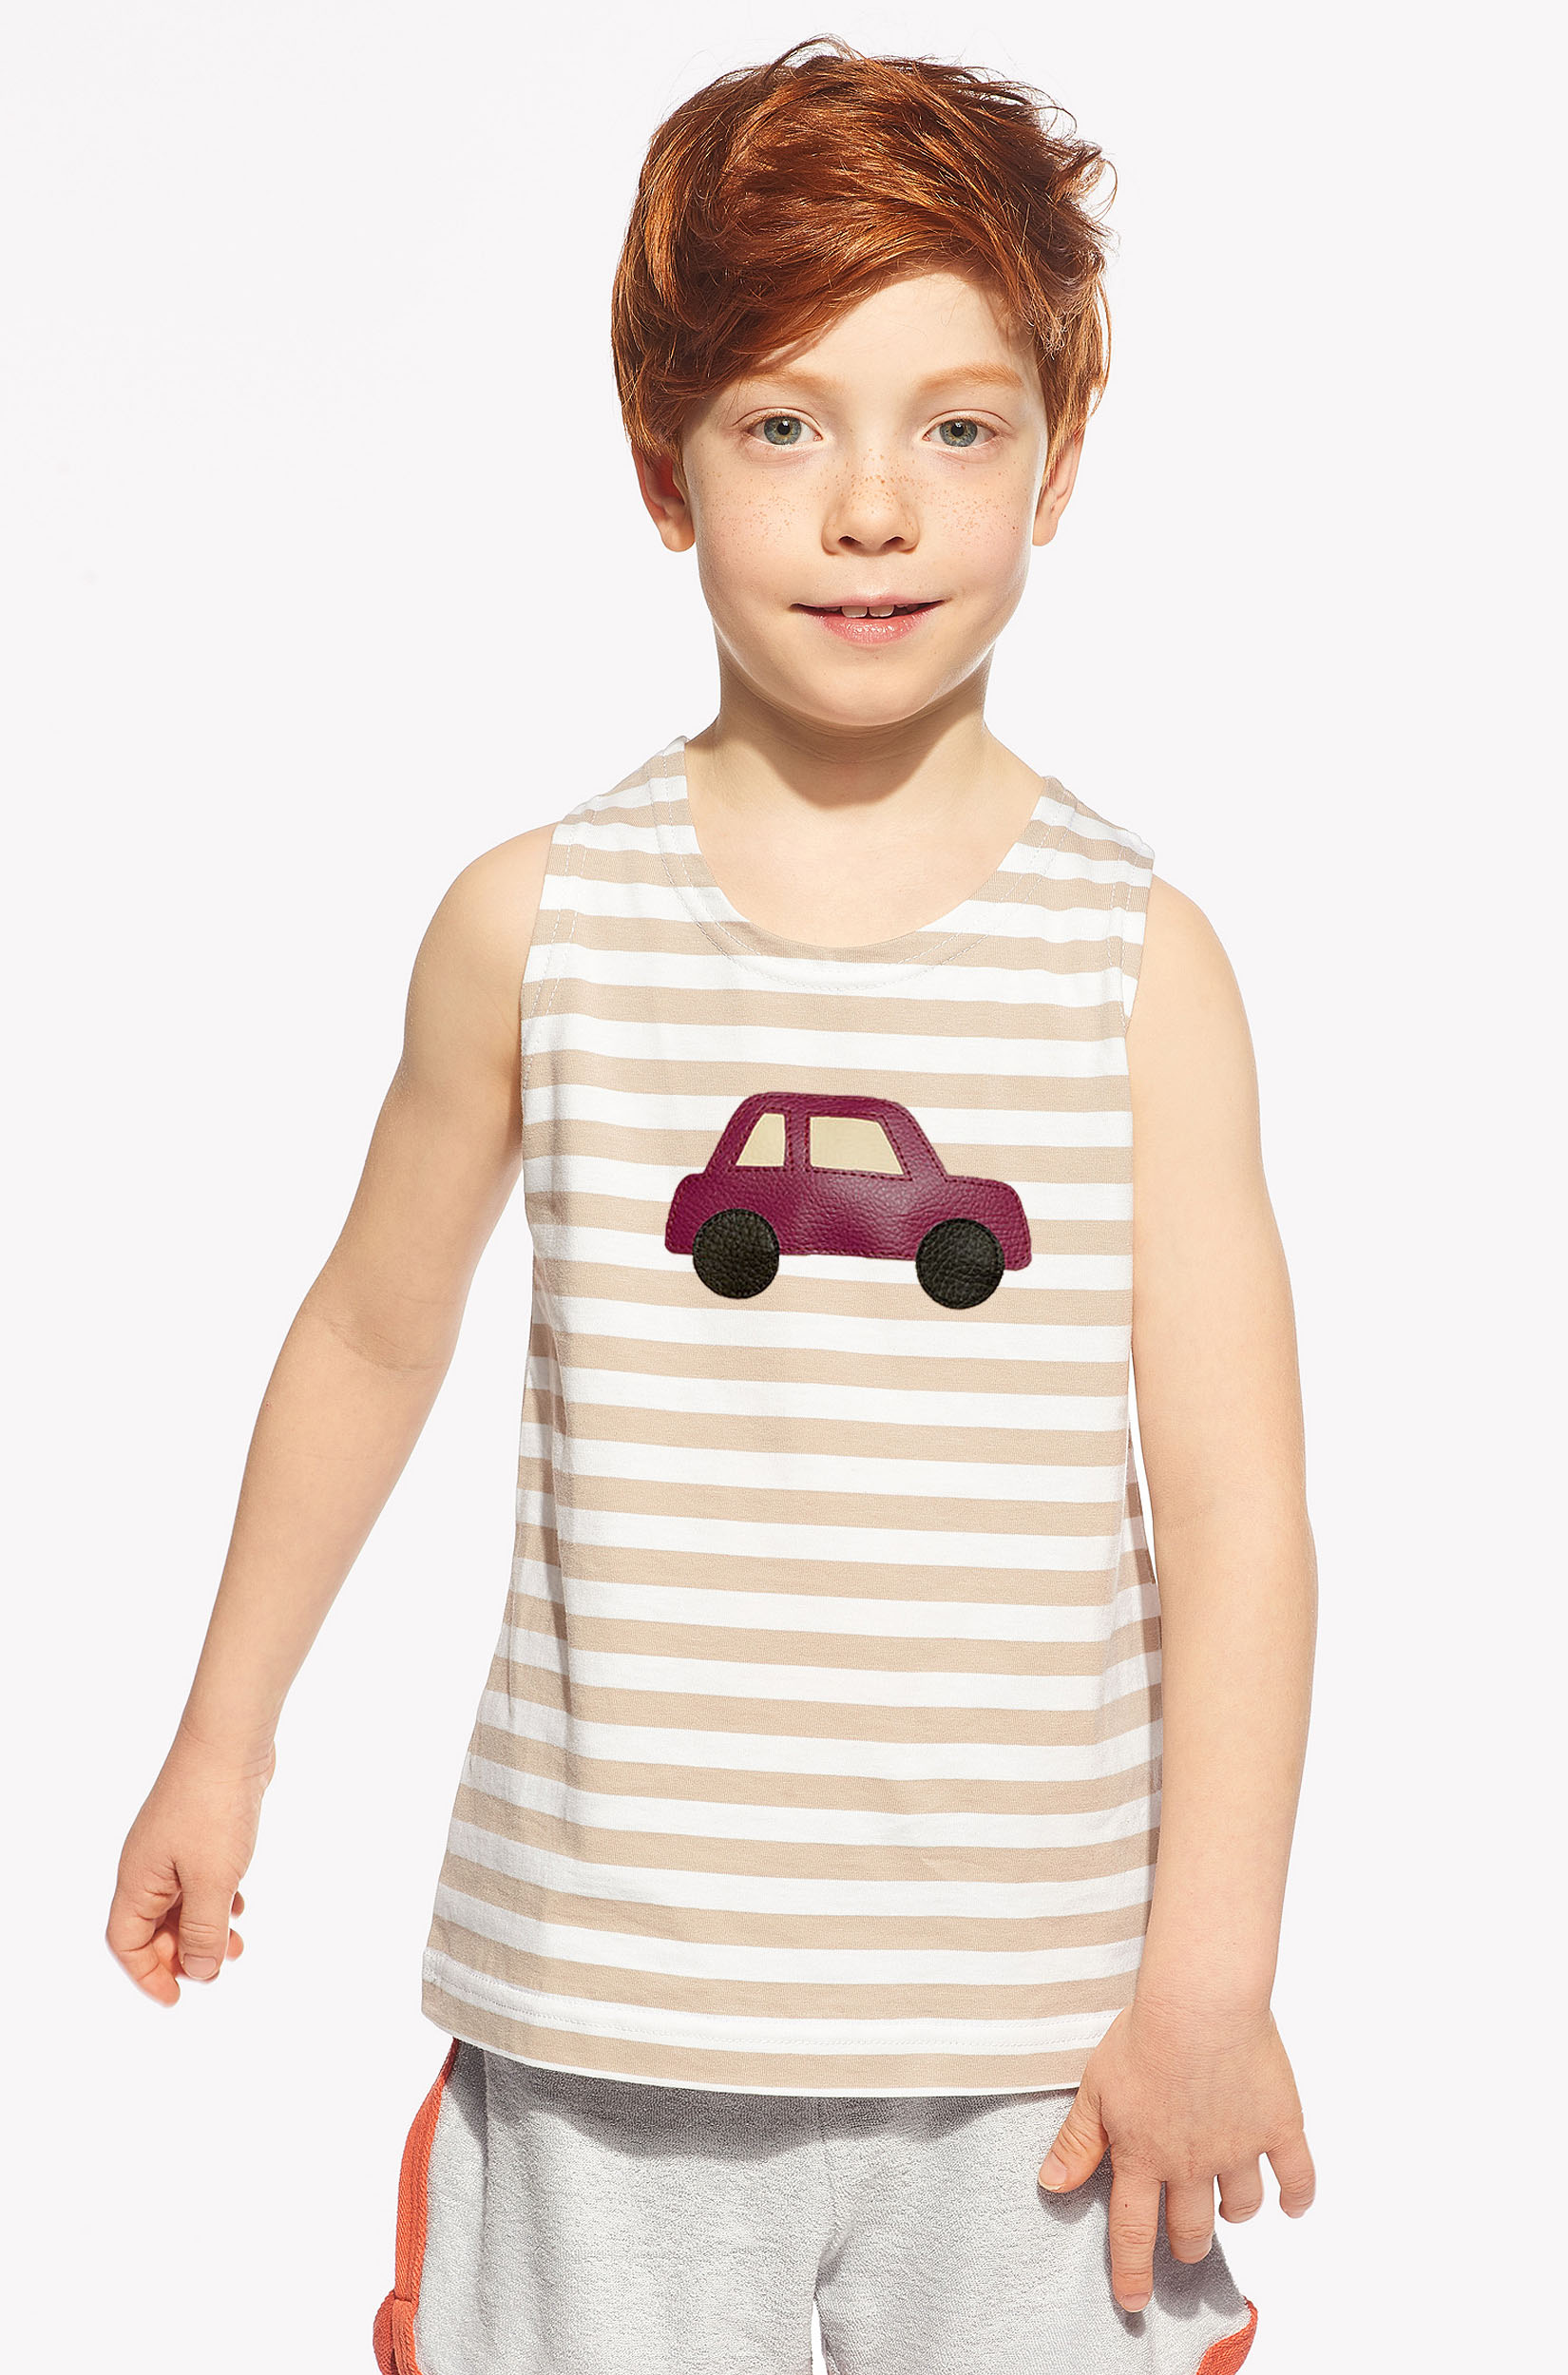 Singlet with car